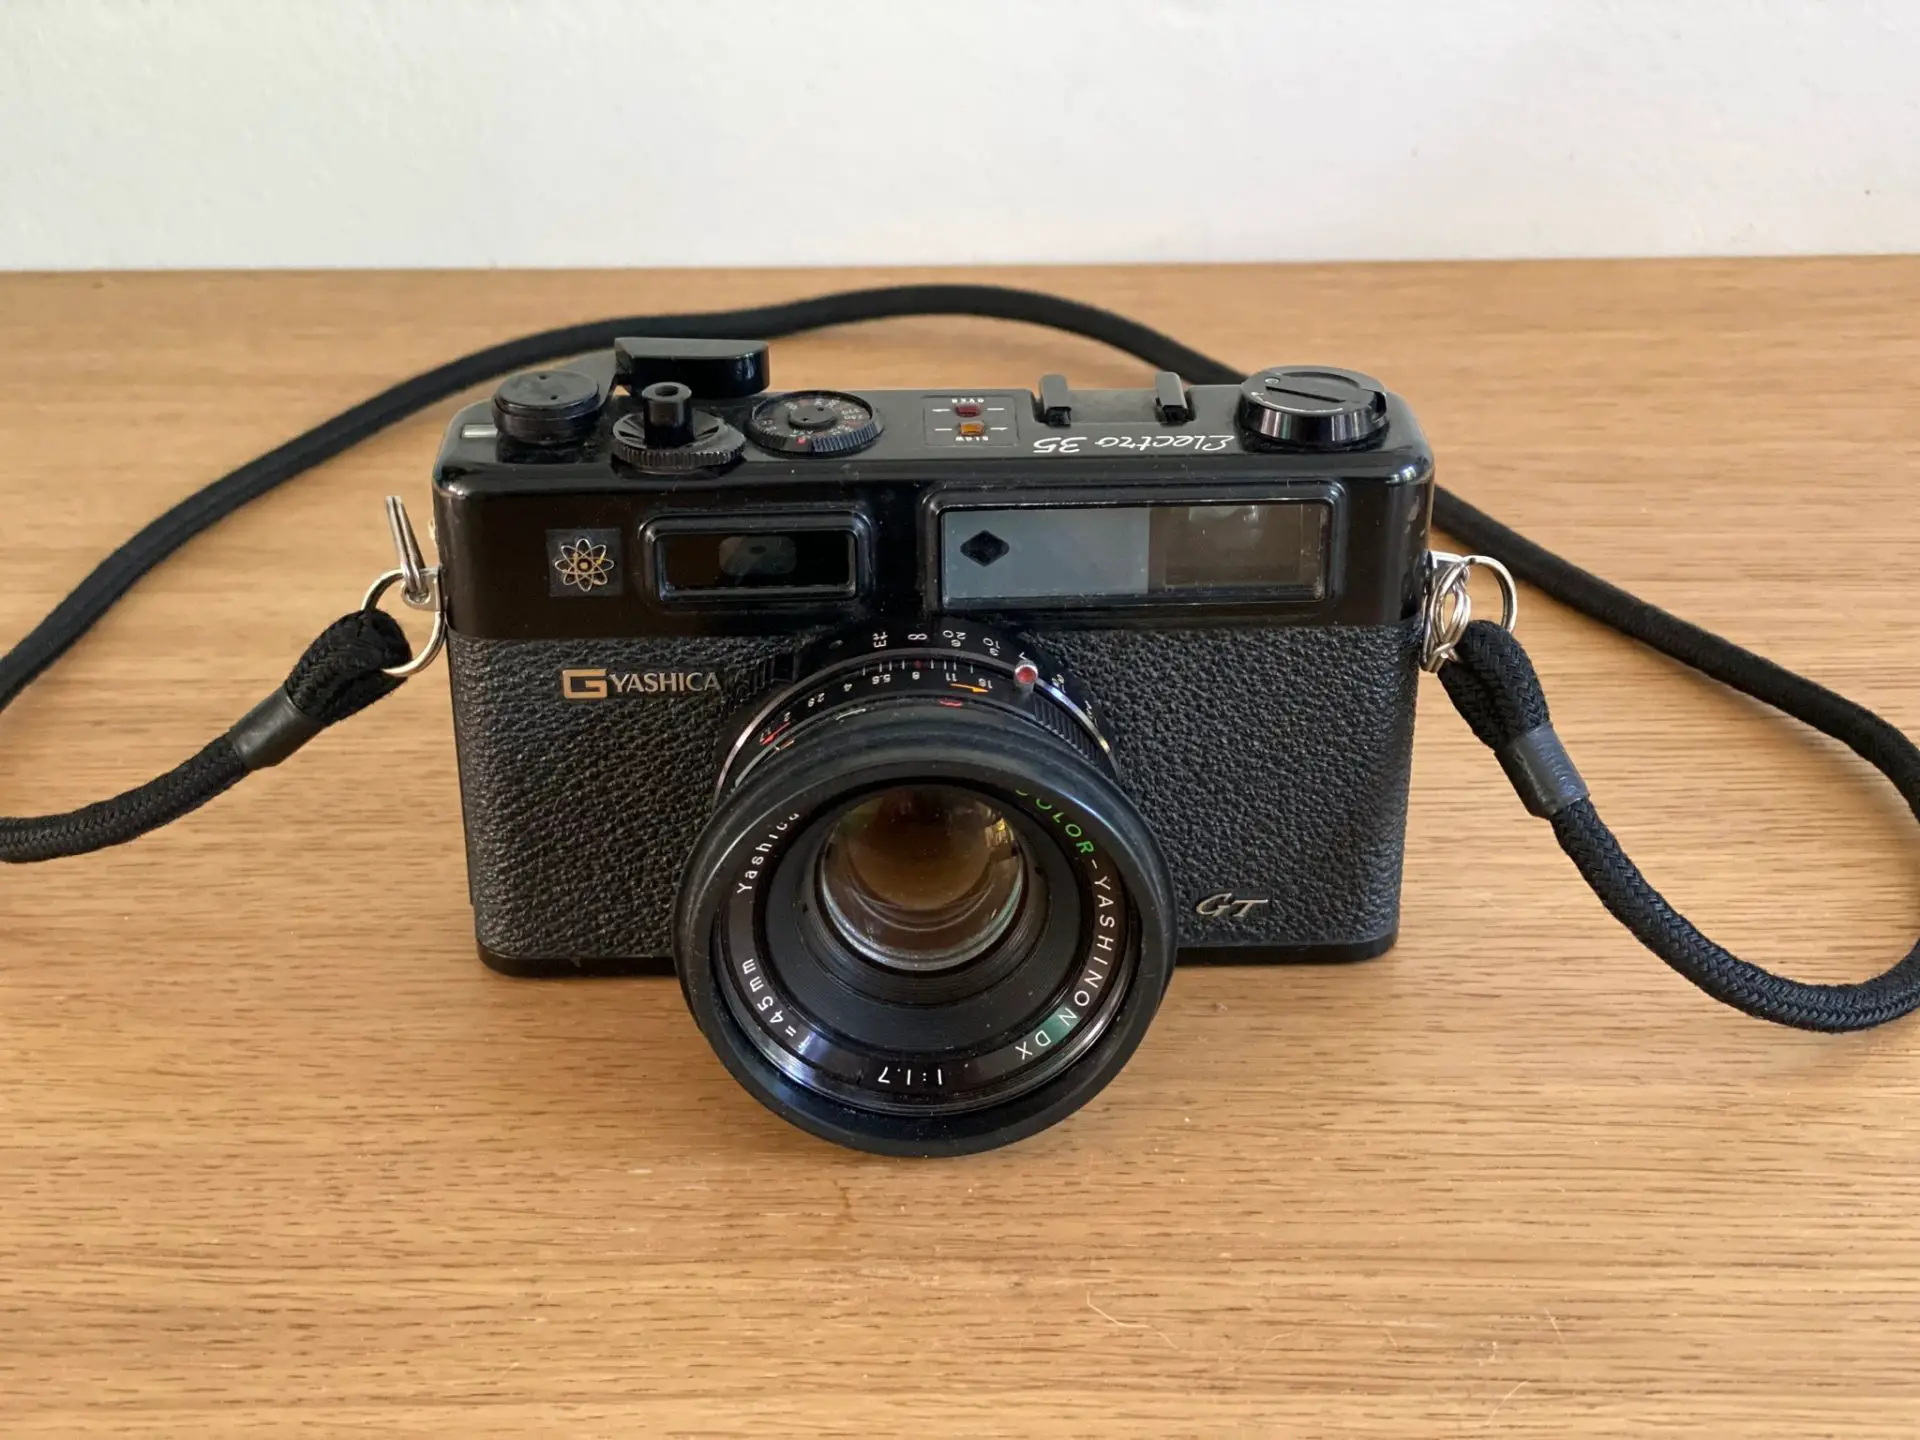 Yashica Electro 35 GT - Finding a Rangefinder - By Francois Marlier